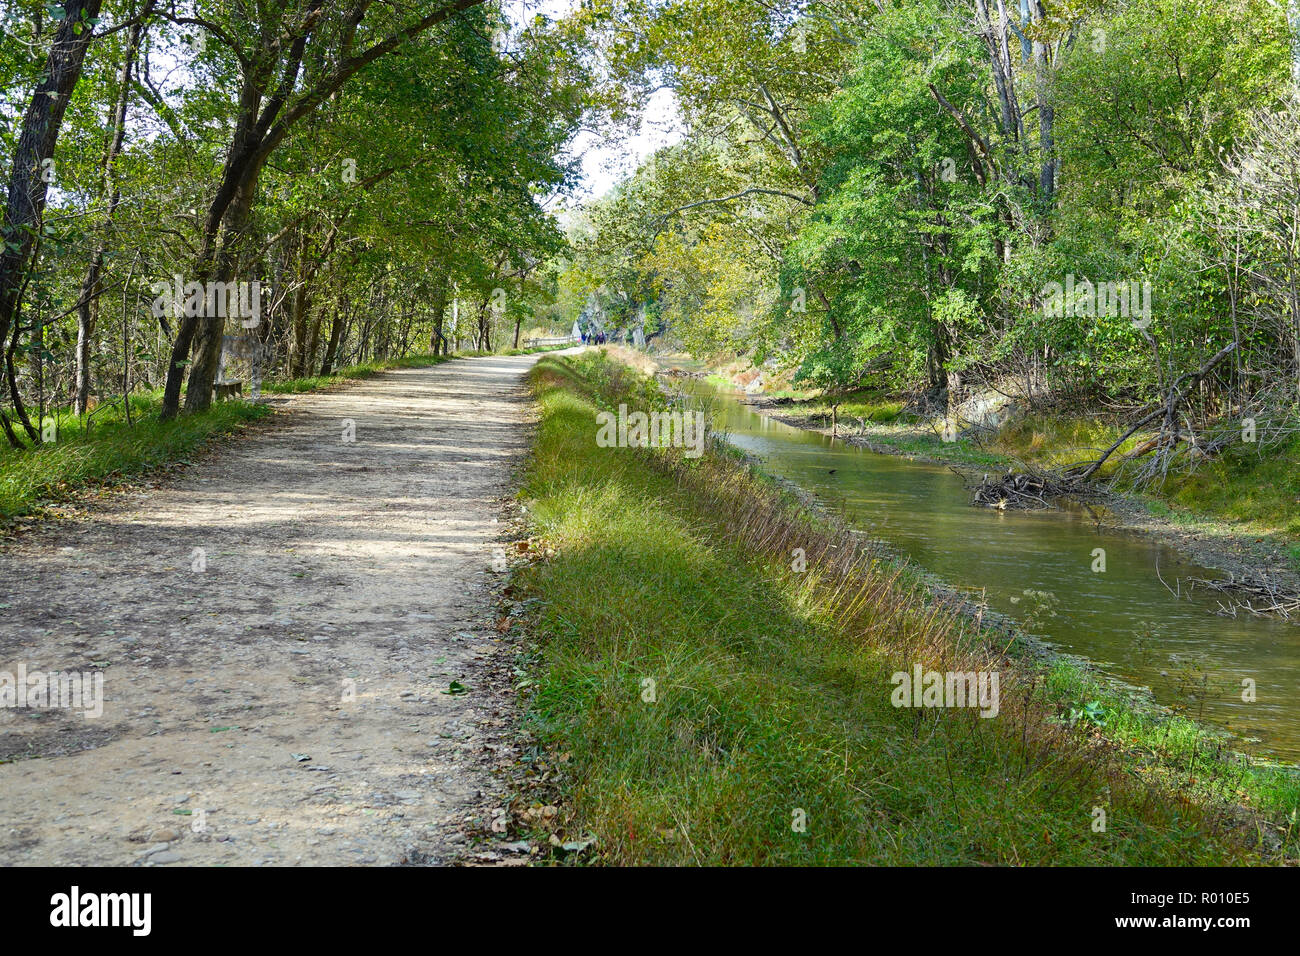 historic canal with arching trees providing shad along tow path Stock Photo